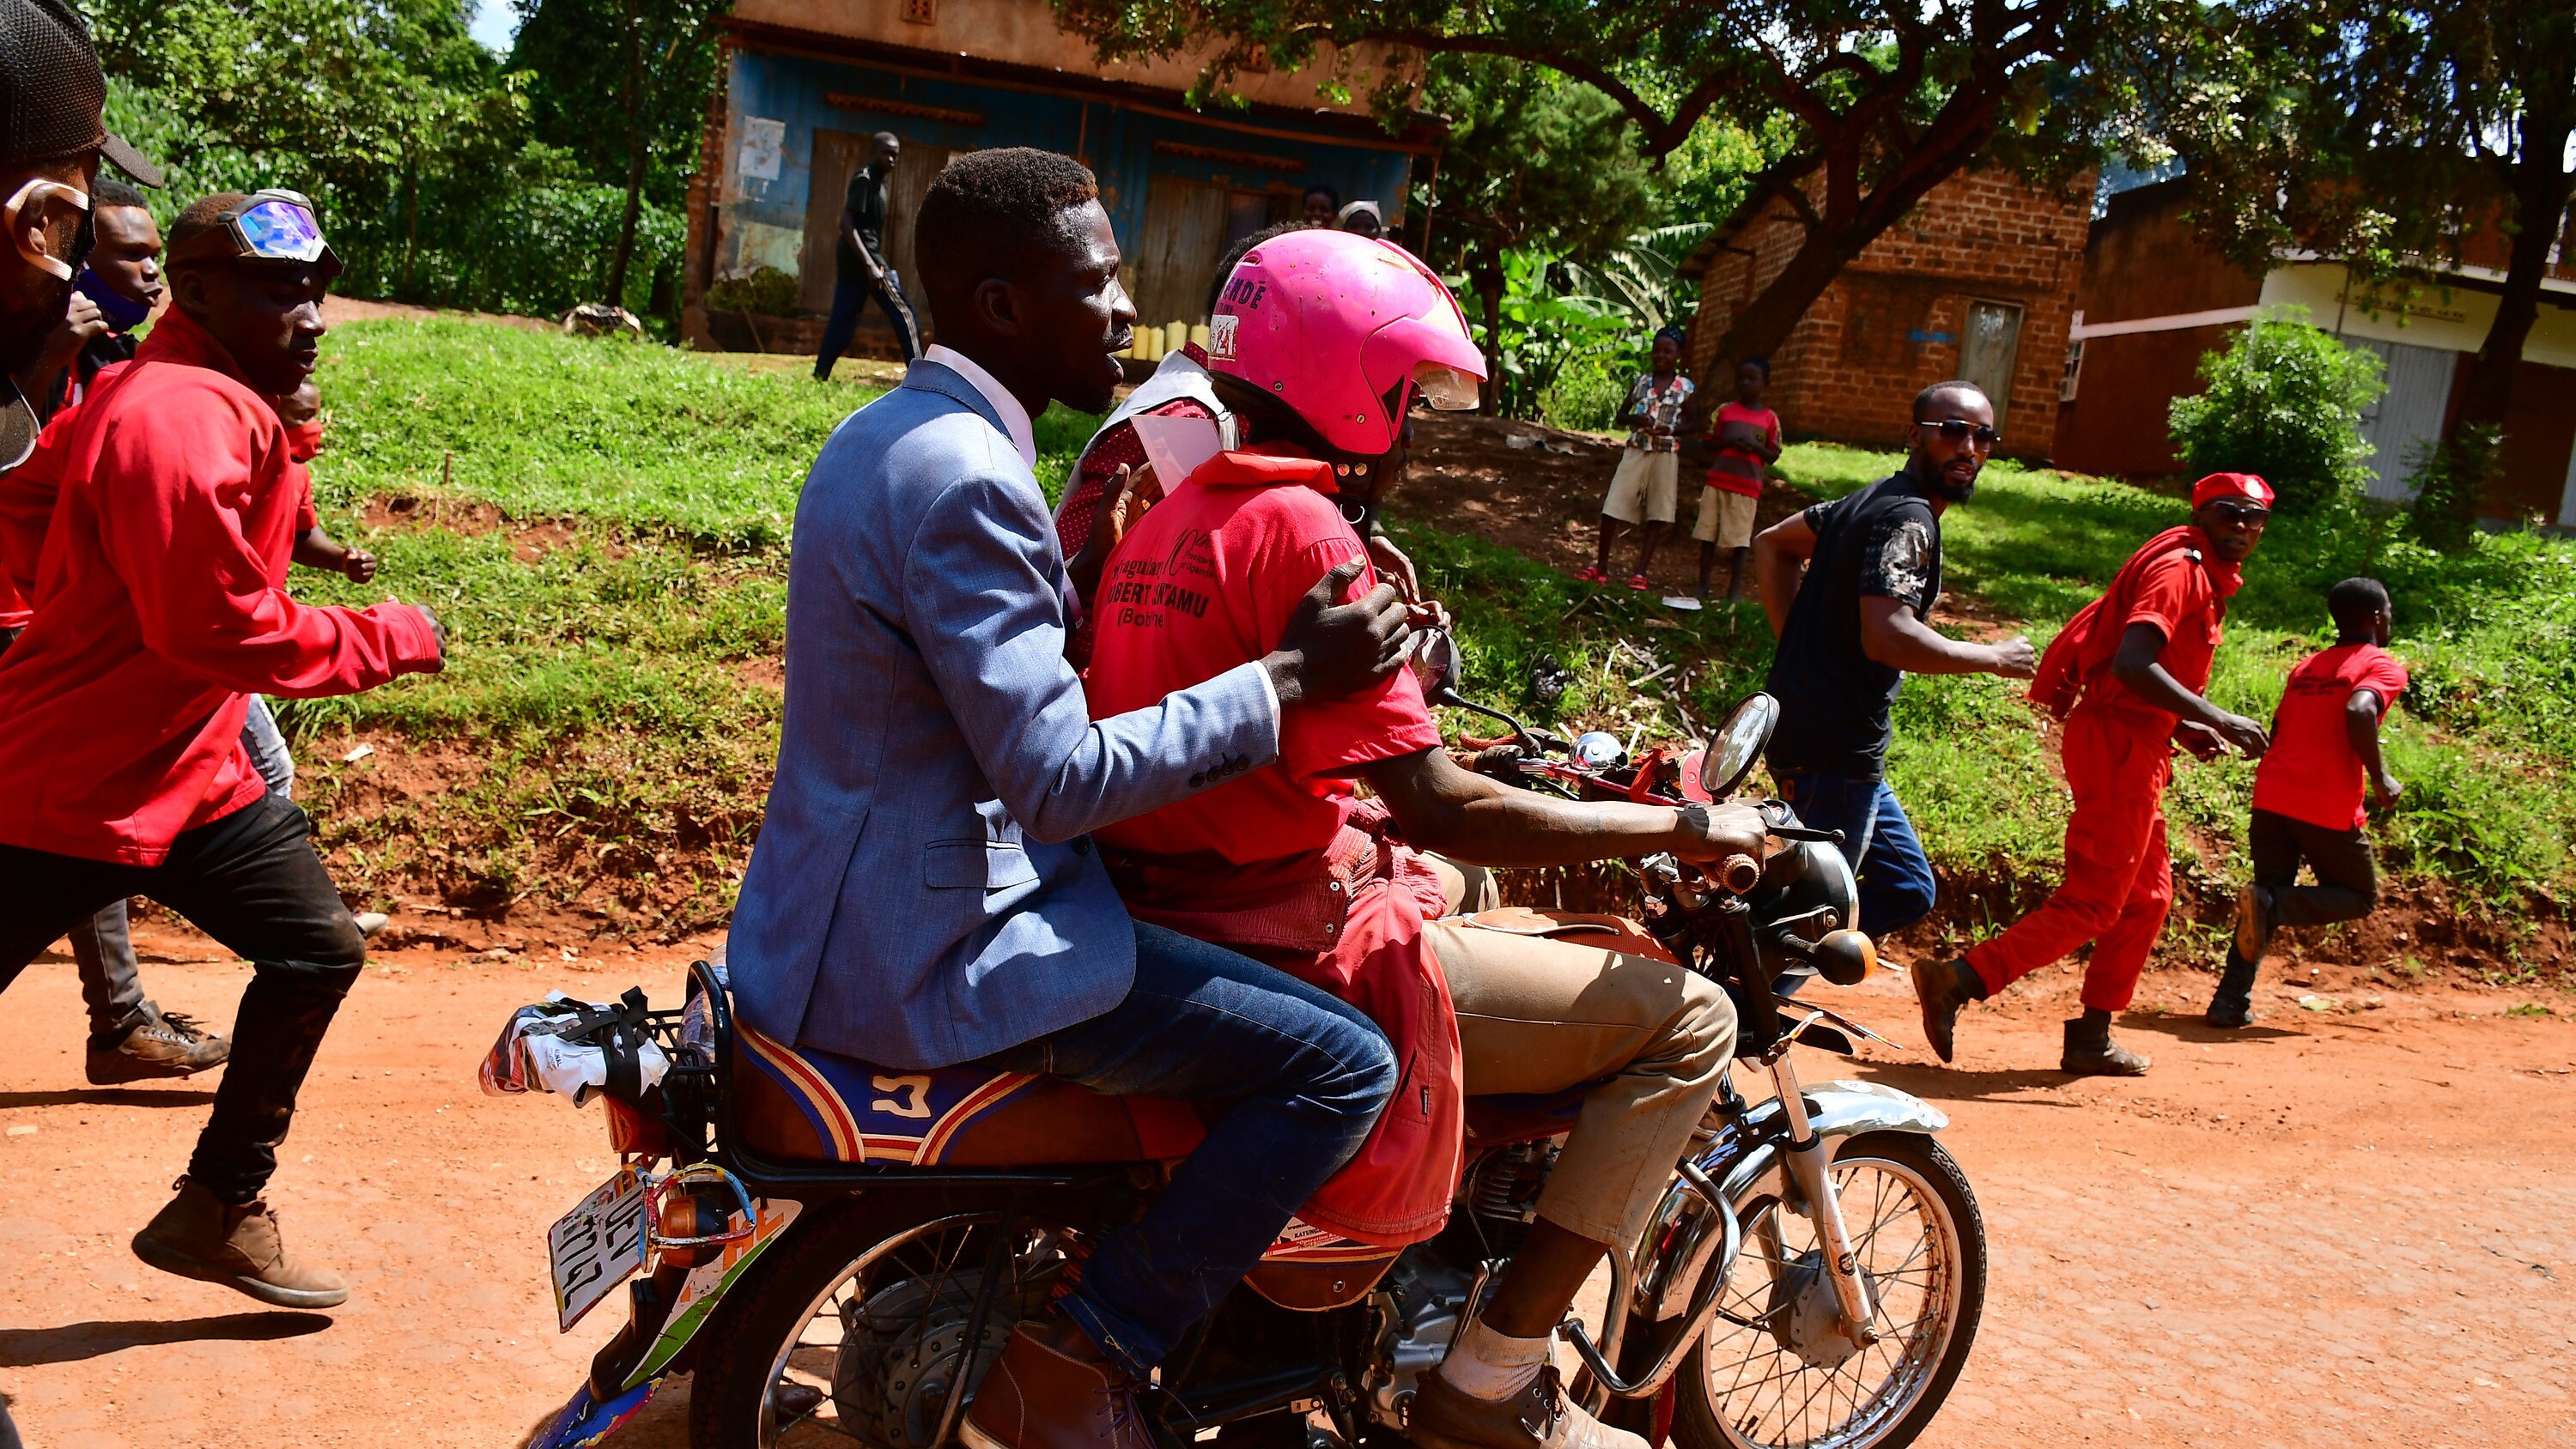 Bobi Wine decides to travel to a campaign location in Kayunga District by motorbike. The Ugandan security vehicles had previously prevented his cars from entering the venue on December 1, 2020. (photo credit: Lookman Kampala)